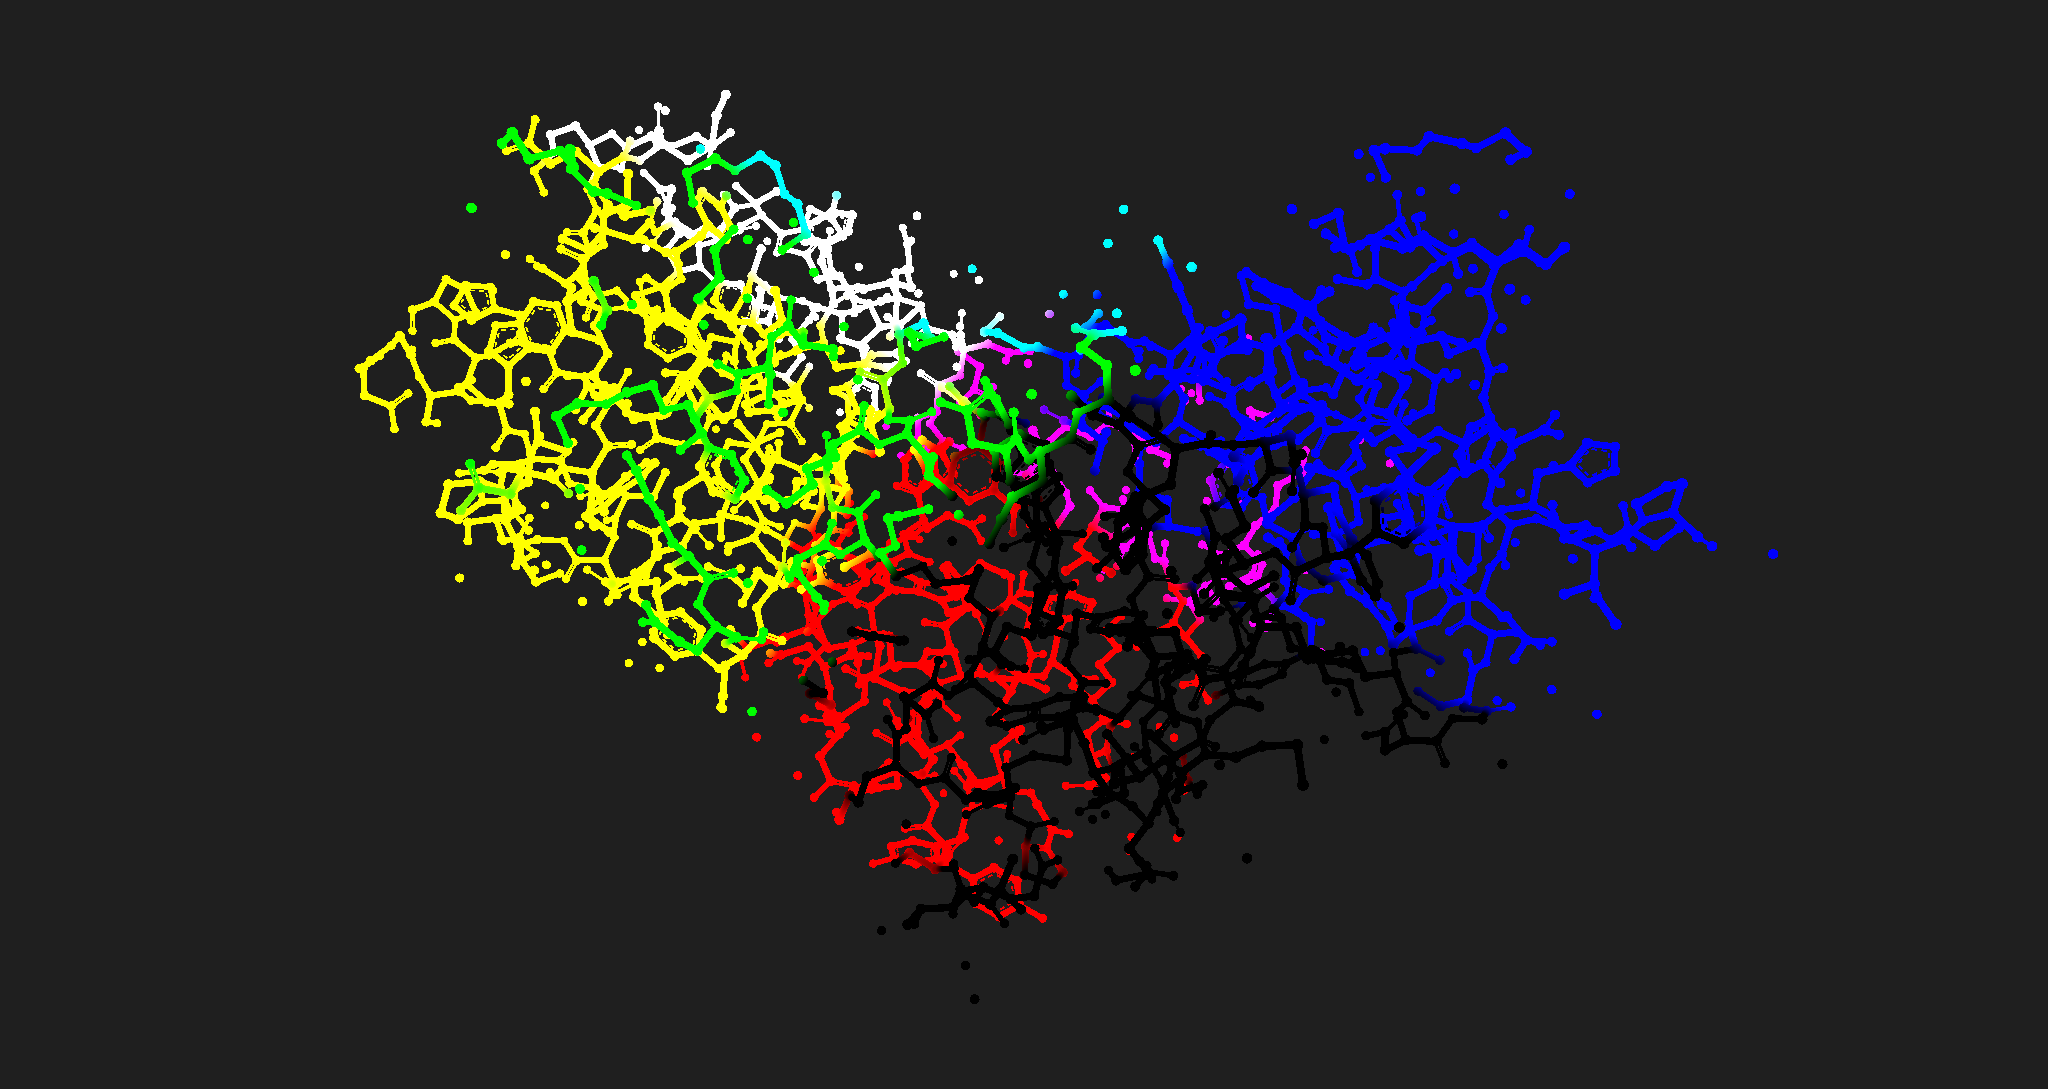 A rendering of a large protein molecule where the mesh is colored based on the XYZ position of the vertices.